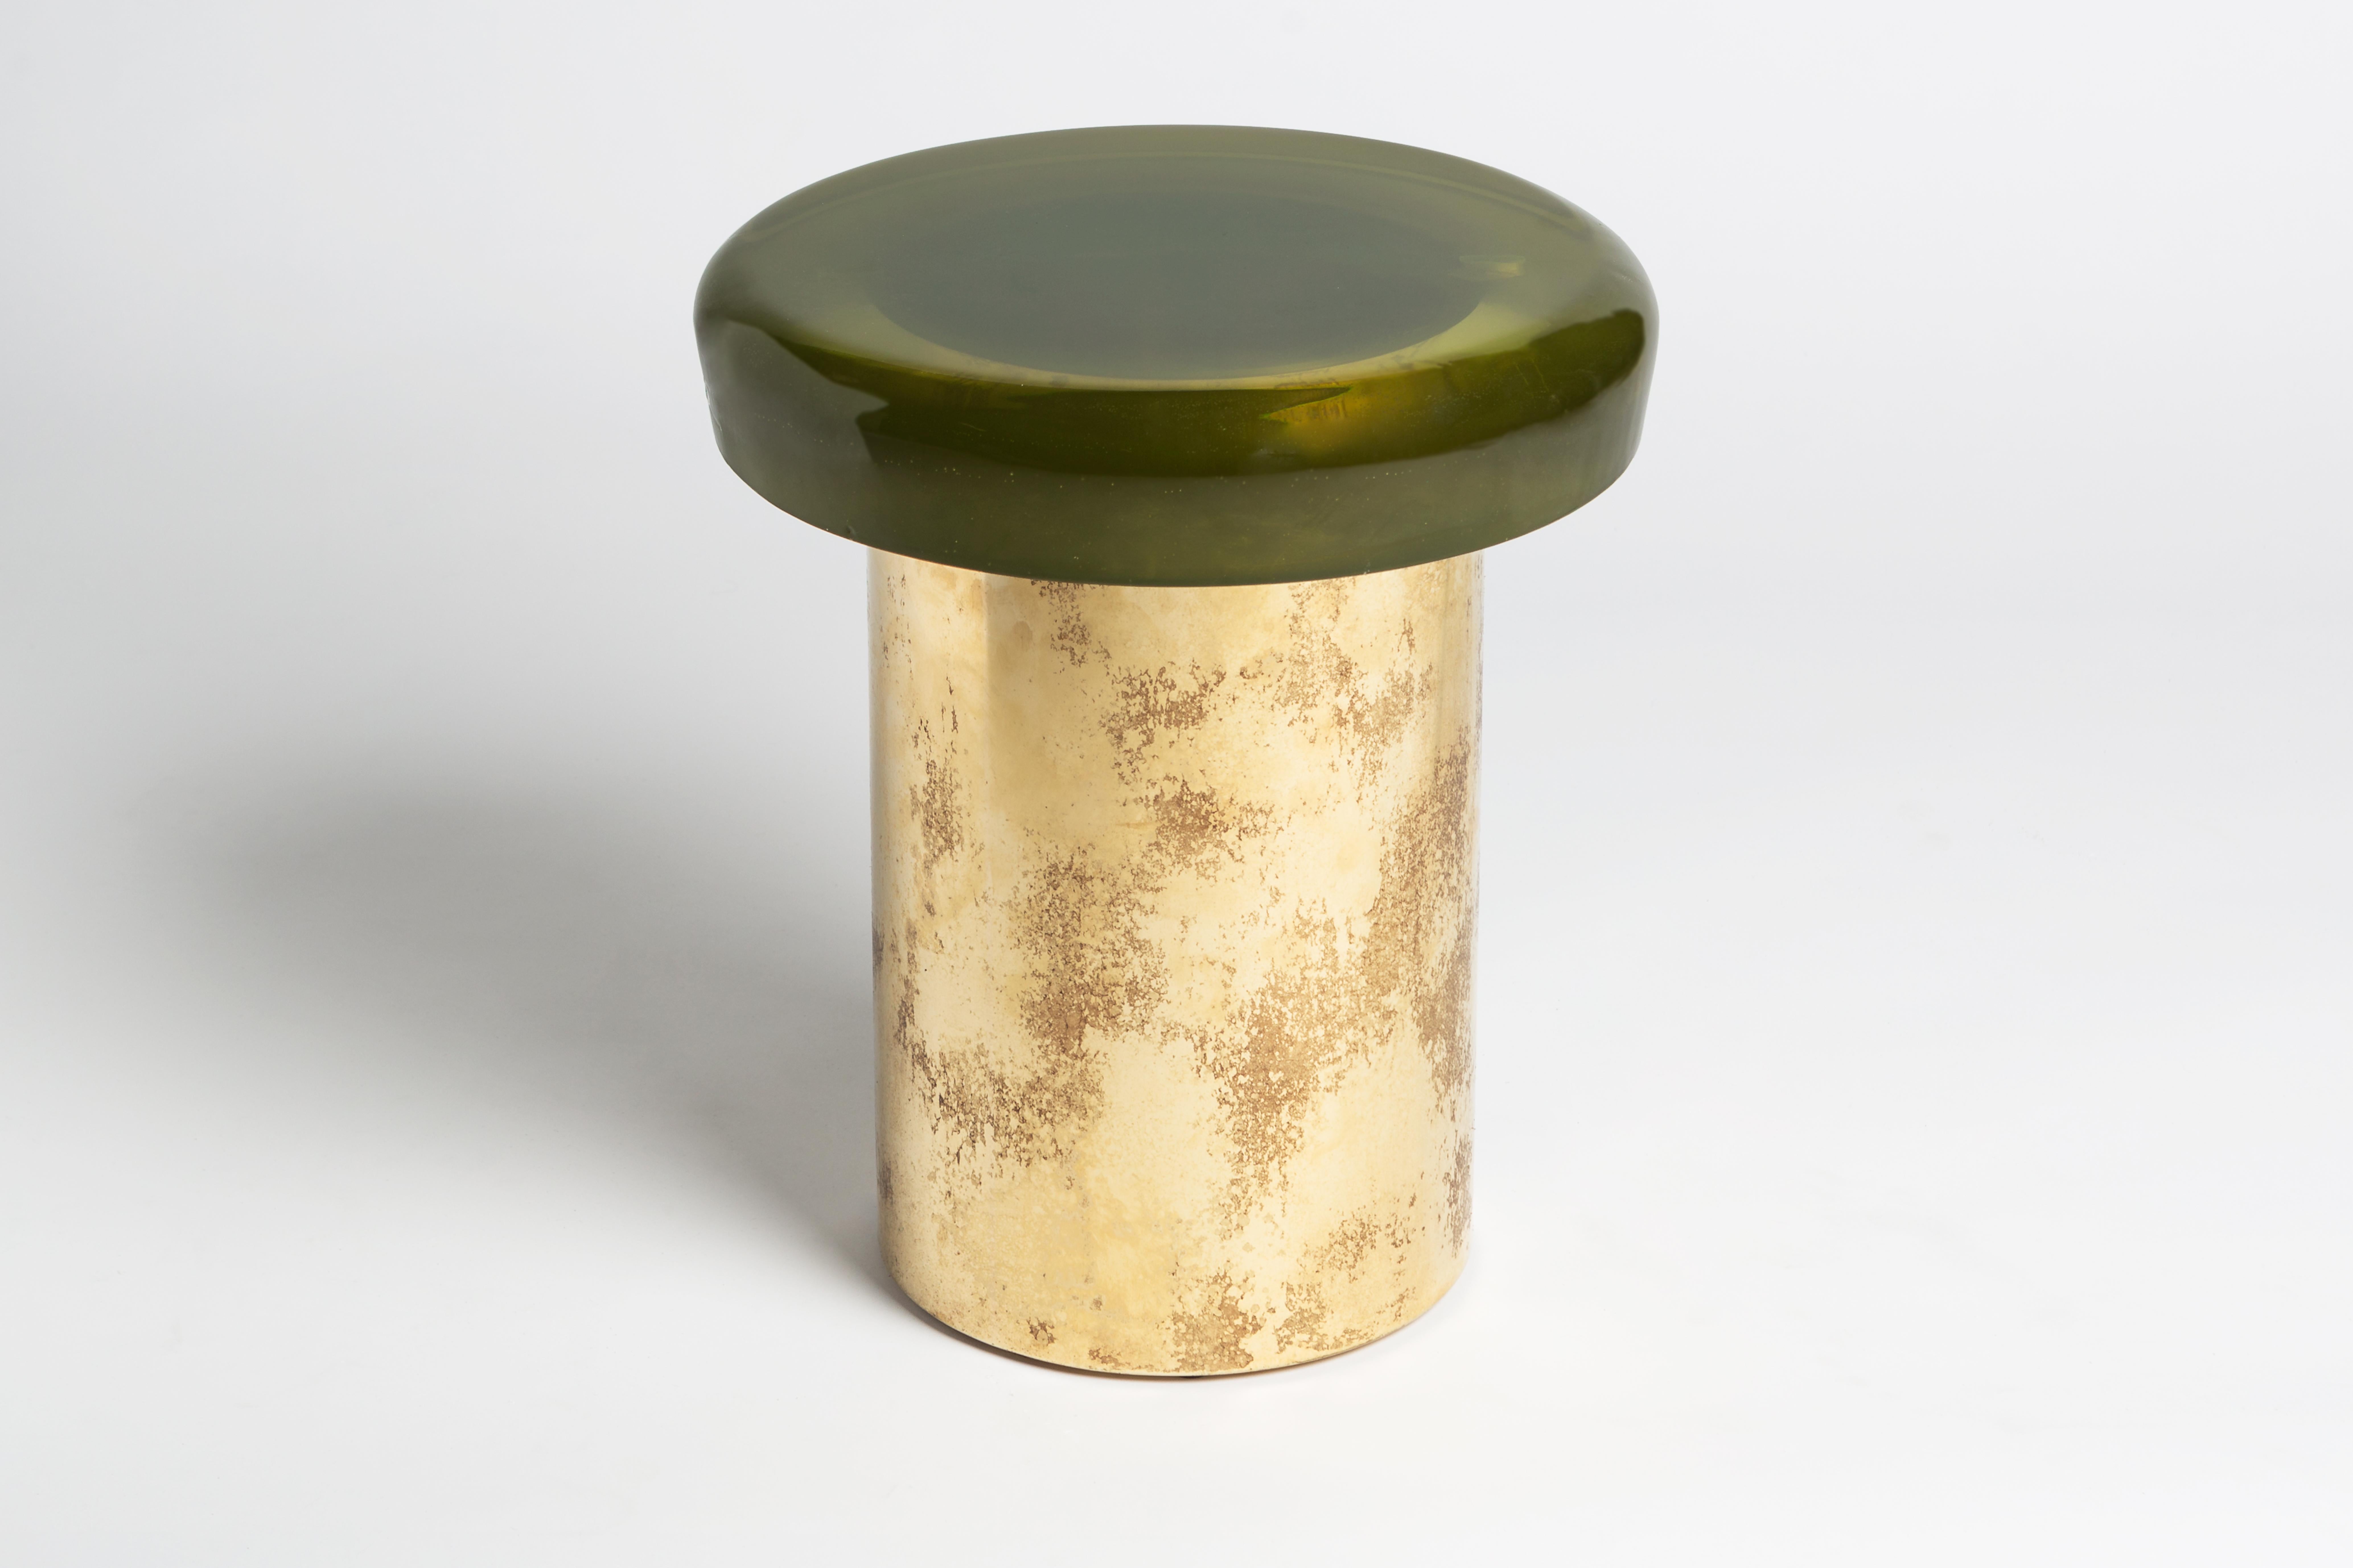 Jade stool by Draga & Aurel
Dimensions: W 40, D 40, H 46, top Ø 40 cm
Materials: Resin and bronze

Formed from a combination of reflective resin and solid brass, the Jade coffee tables look like precious gems. The surface is made by hand in